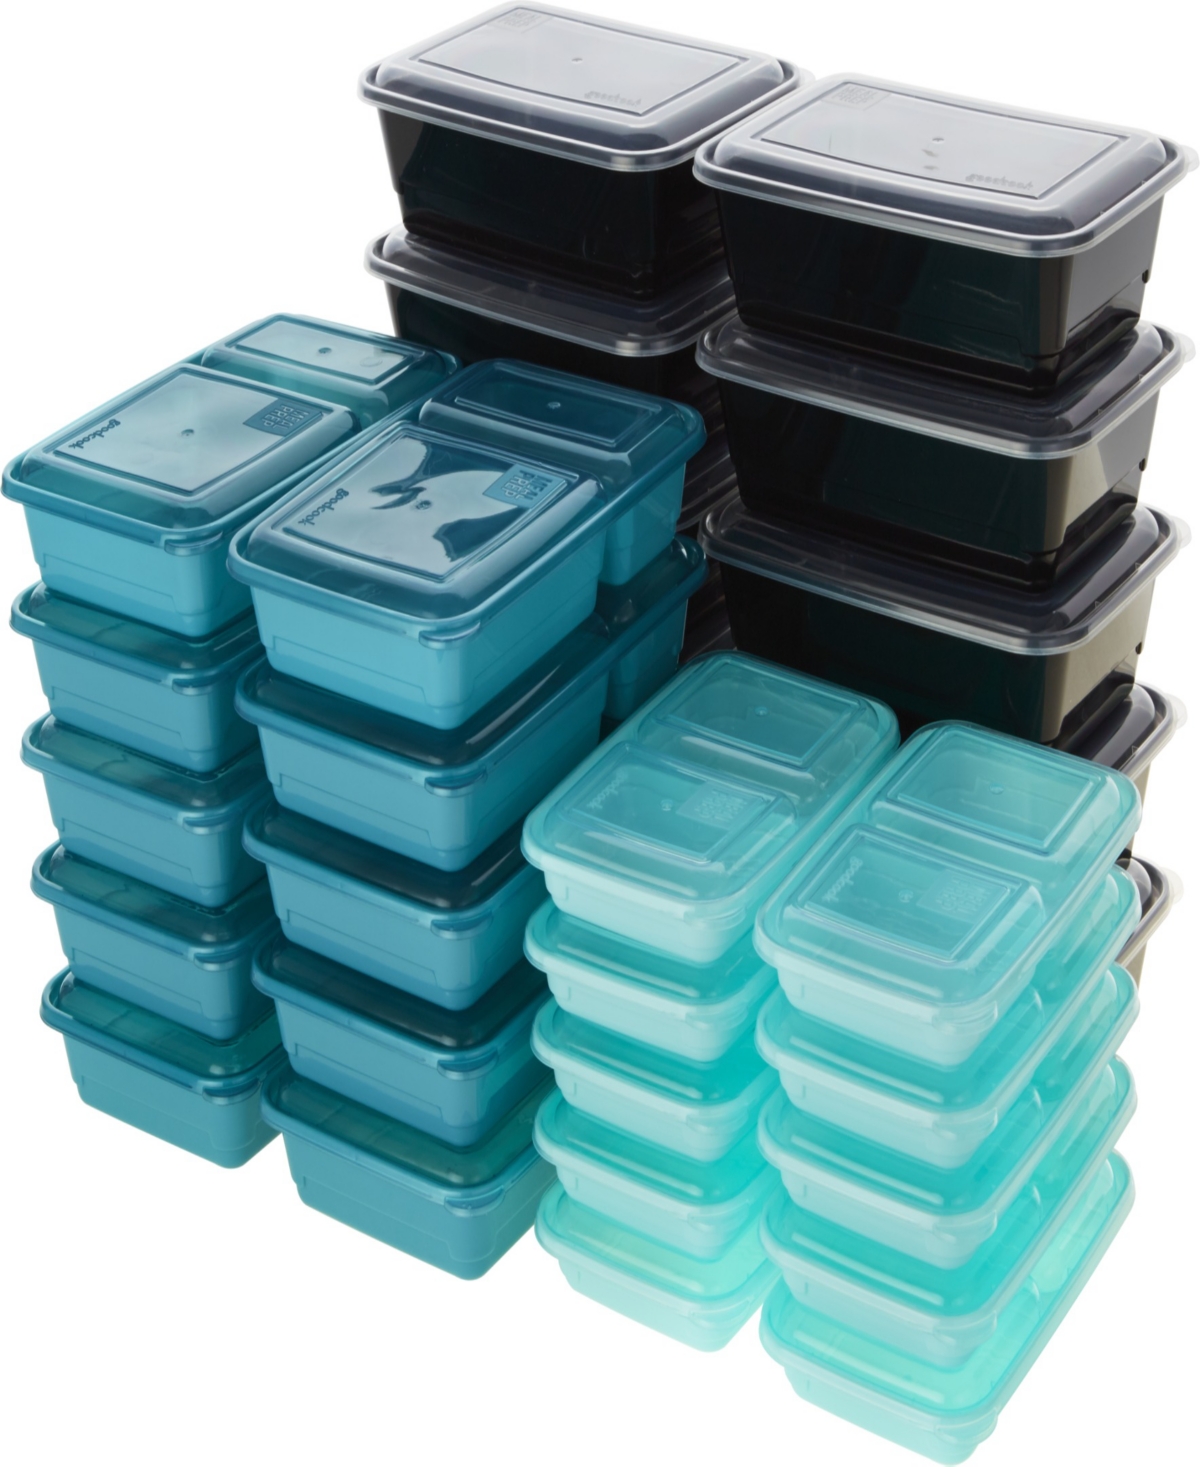 Good Cook Meal Prep 60-piece Container Set, Biphenyl A Free In Multi